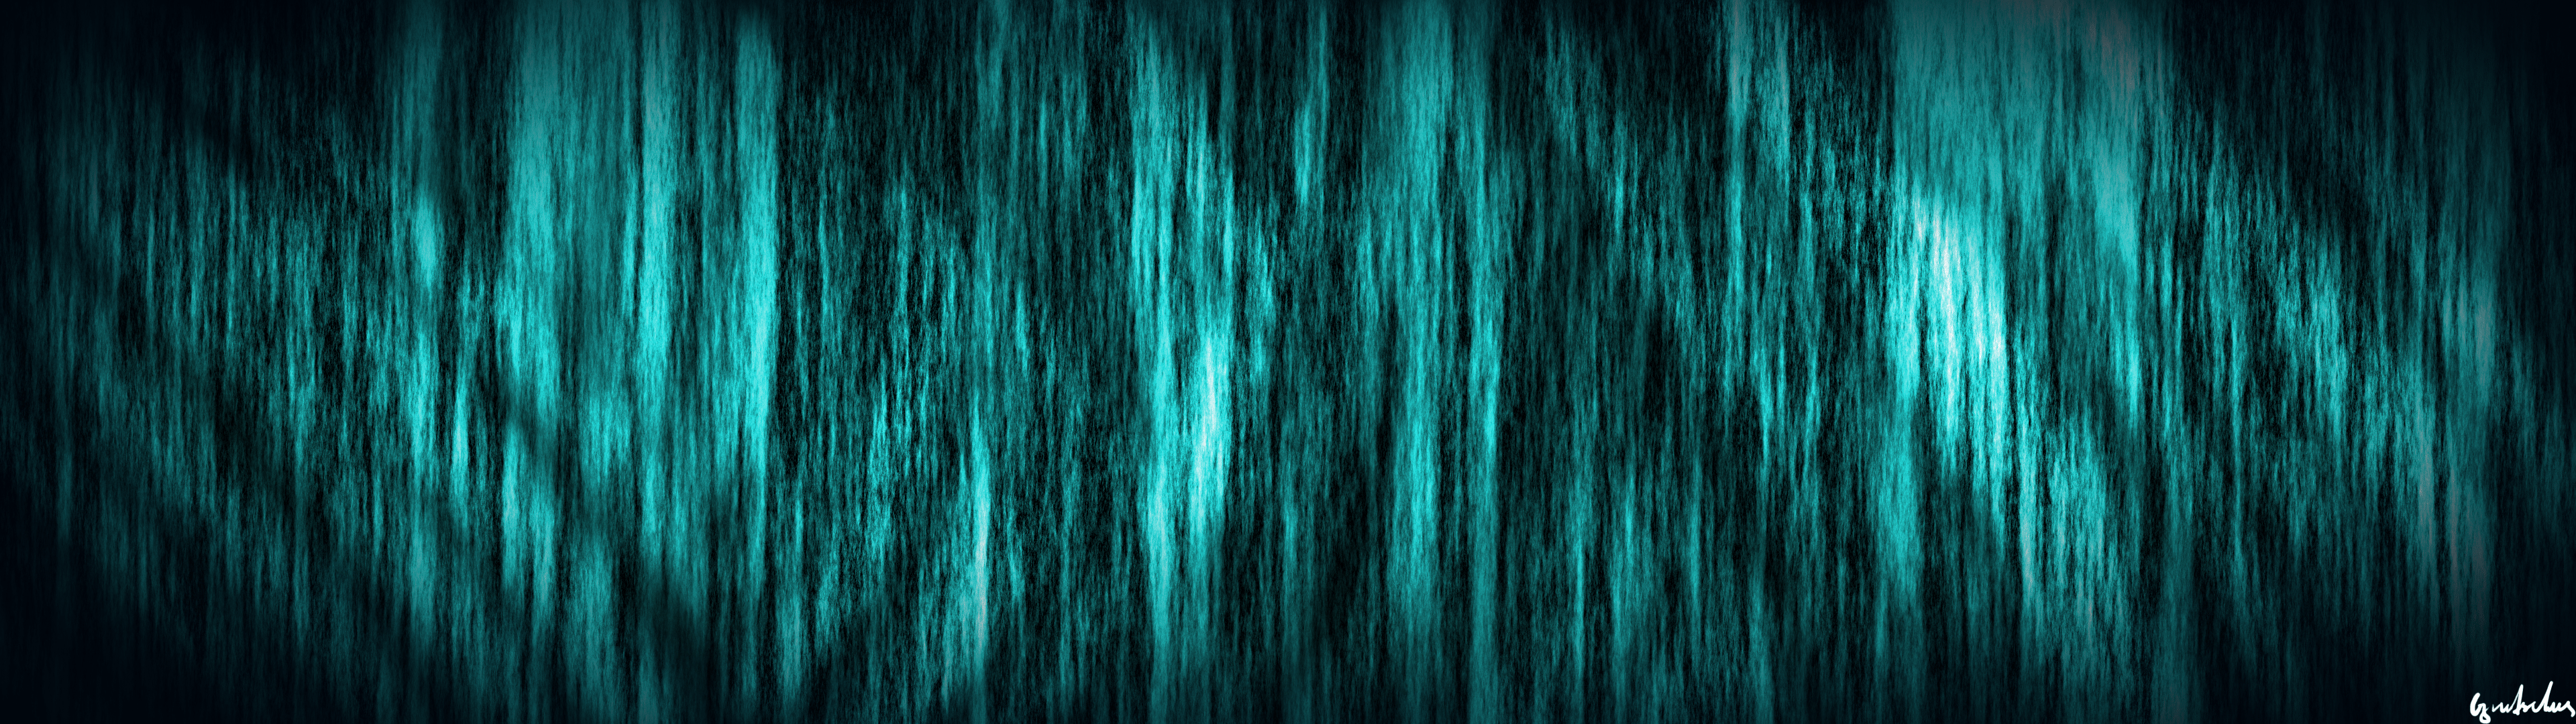 A dark forest with green and blue lights shining through the trees. - Cyan